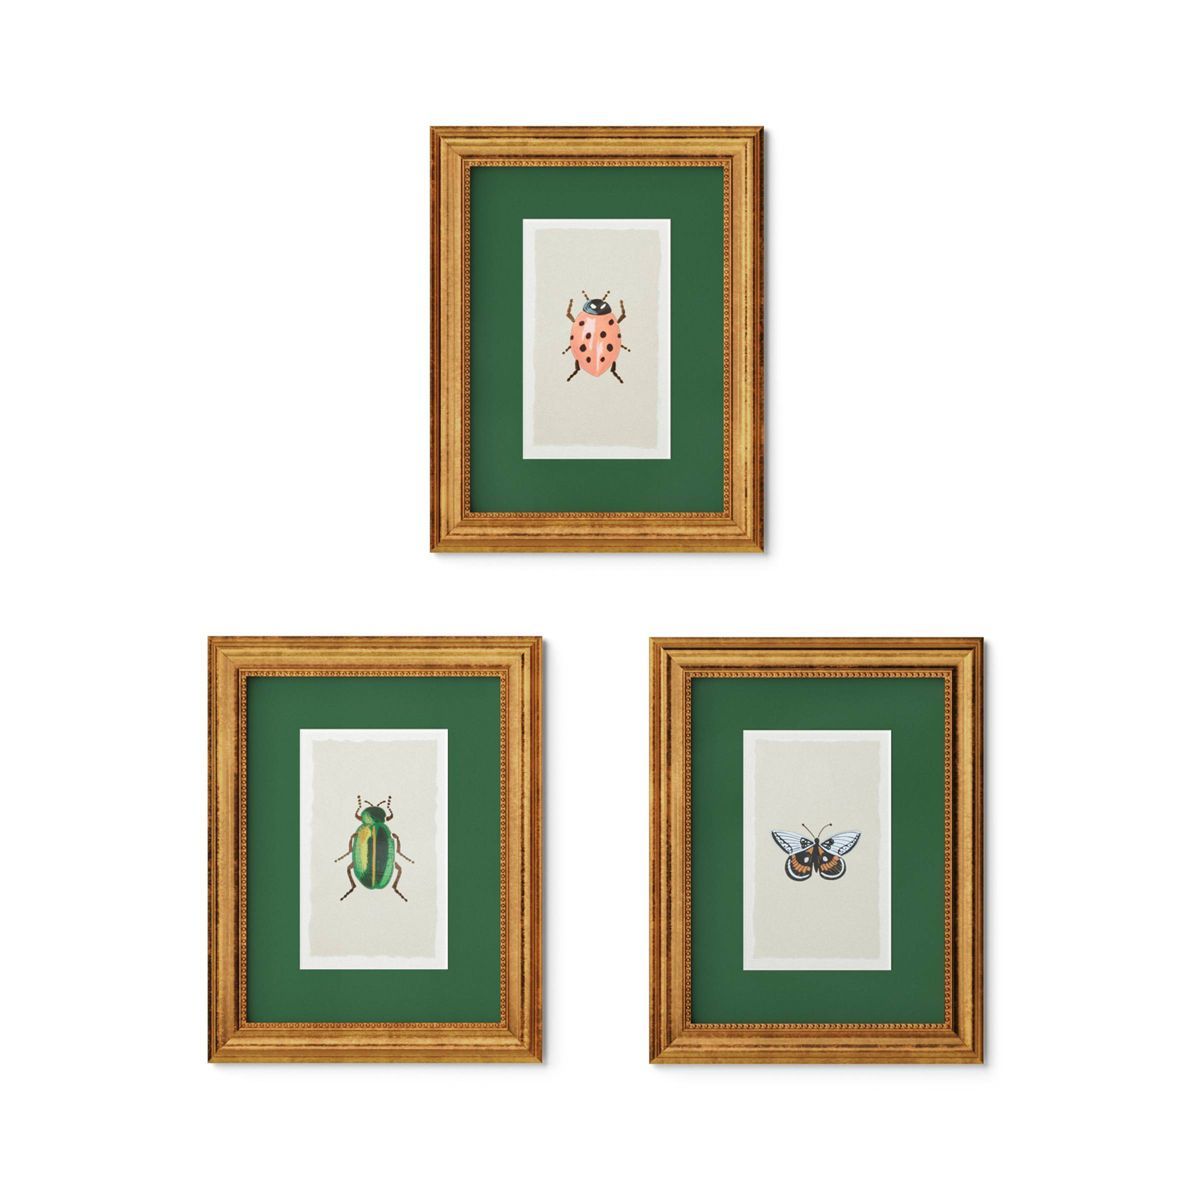 Rifle Paper Co. x Target 11"x14" Gold Foil Insect Poster Framed Wall Art Prints Set of 3 | Target